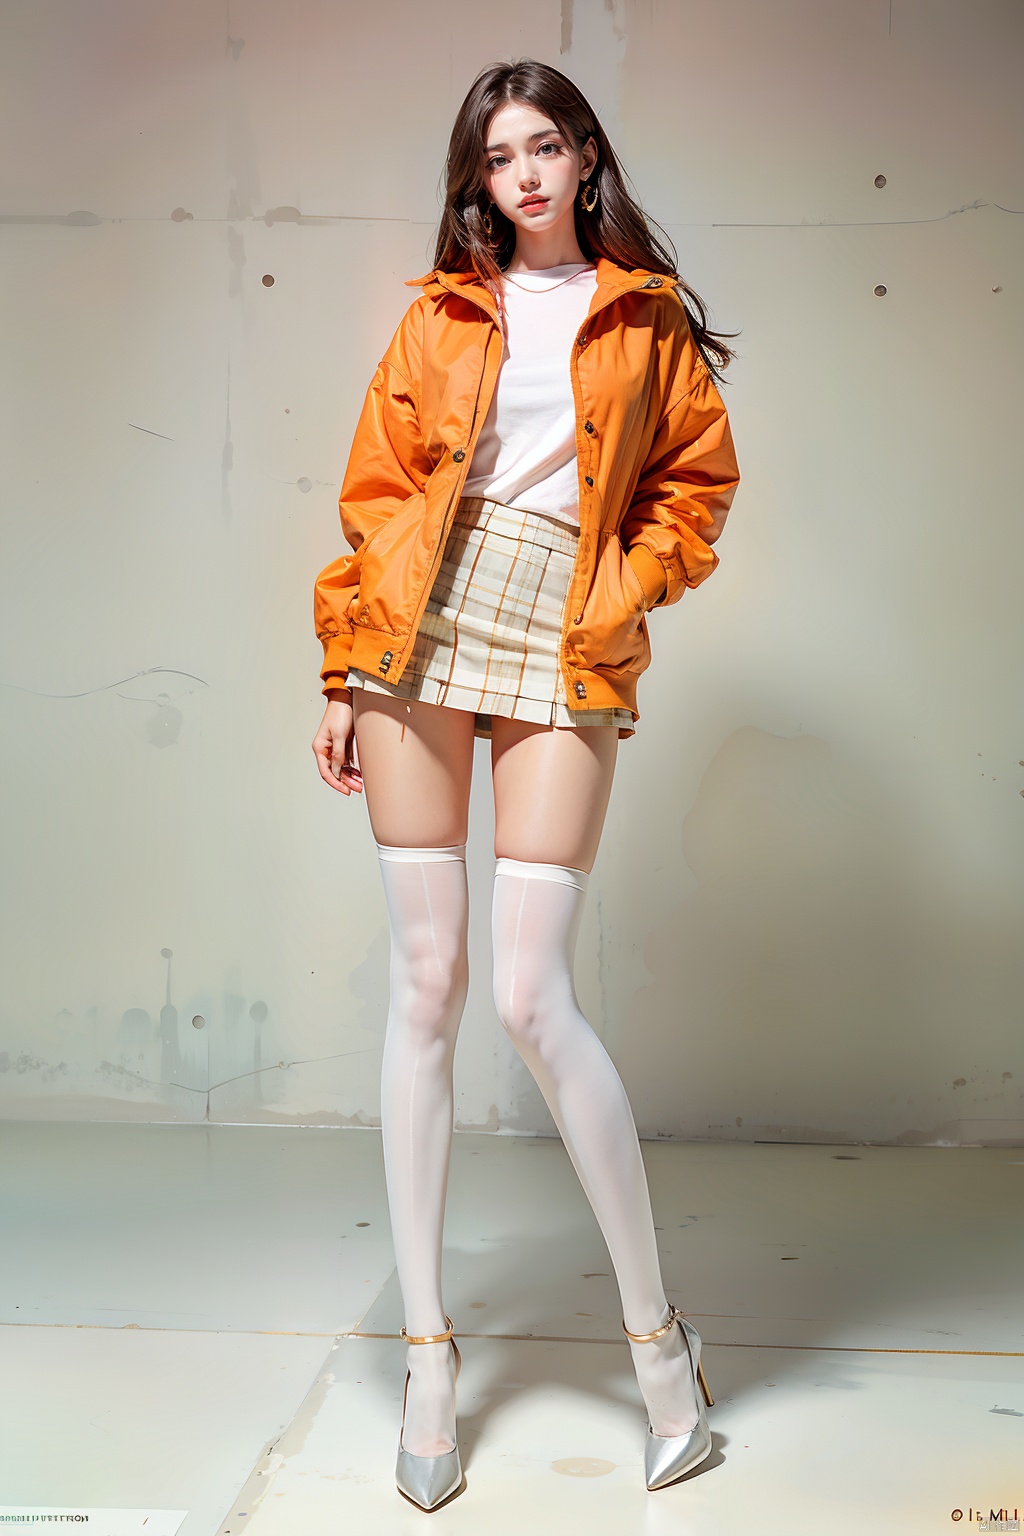  Masterpiece-level best_quality, concept artwork, a lonely solo girl, ,fashion,(mini skirt:1),Super long legs,, standing, realistic, Professionalstudio,highheels,trend,pantyhose,skinny